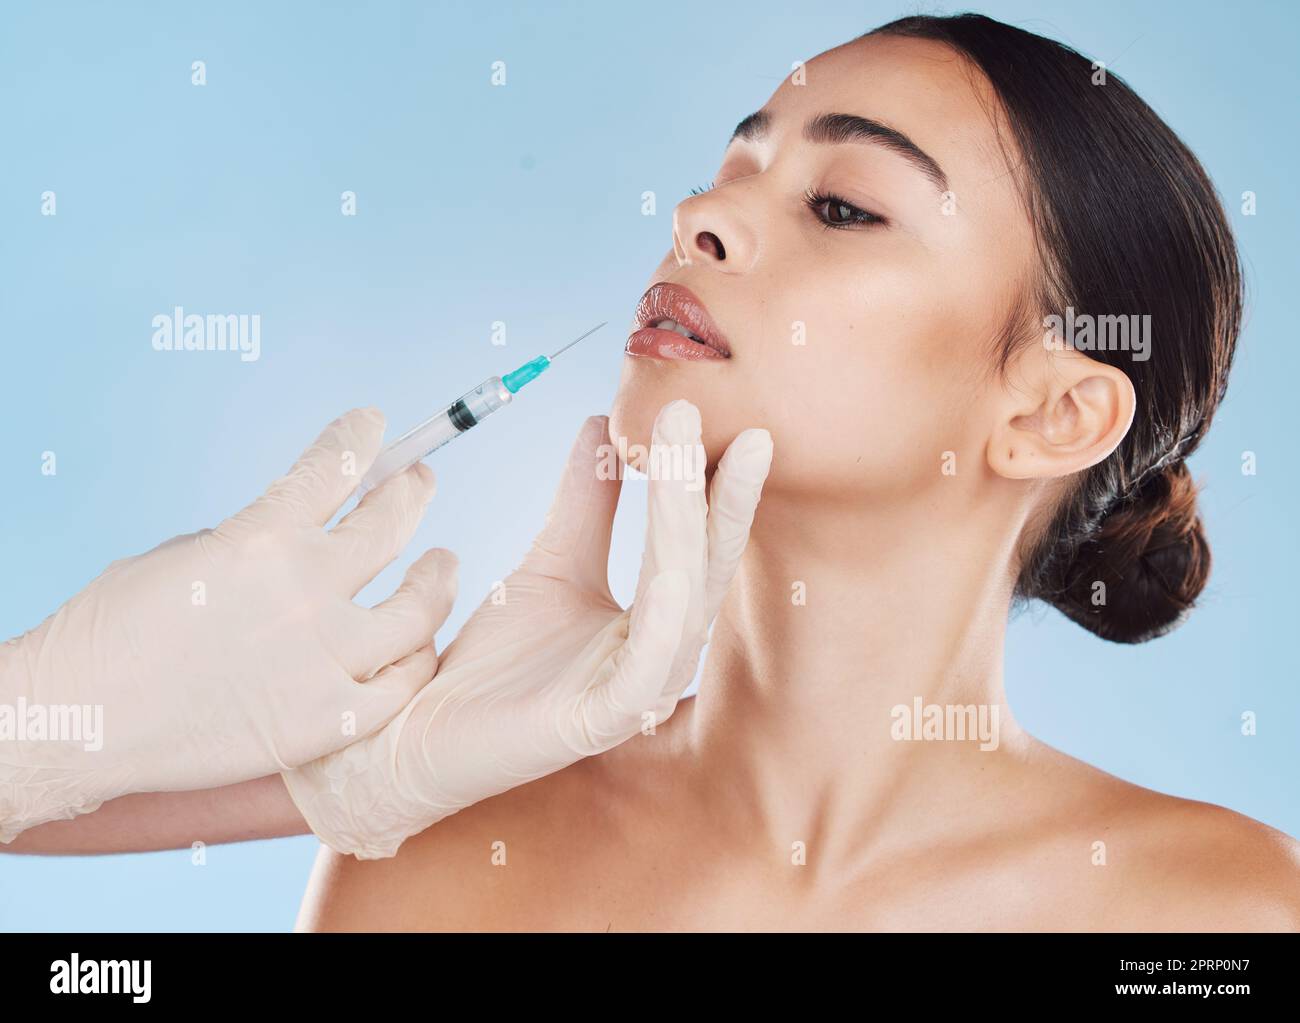 Plastic surgery, botox and lip filler on woman for facial beauty aesthetic and medical cosmetic. Hands and female face augmentation surgeon or doctor working on patient lips with injection needle. Stock Photo